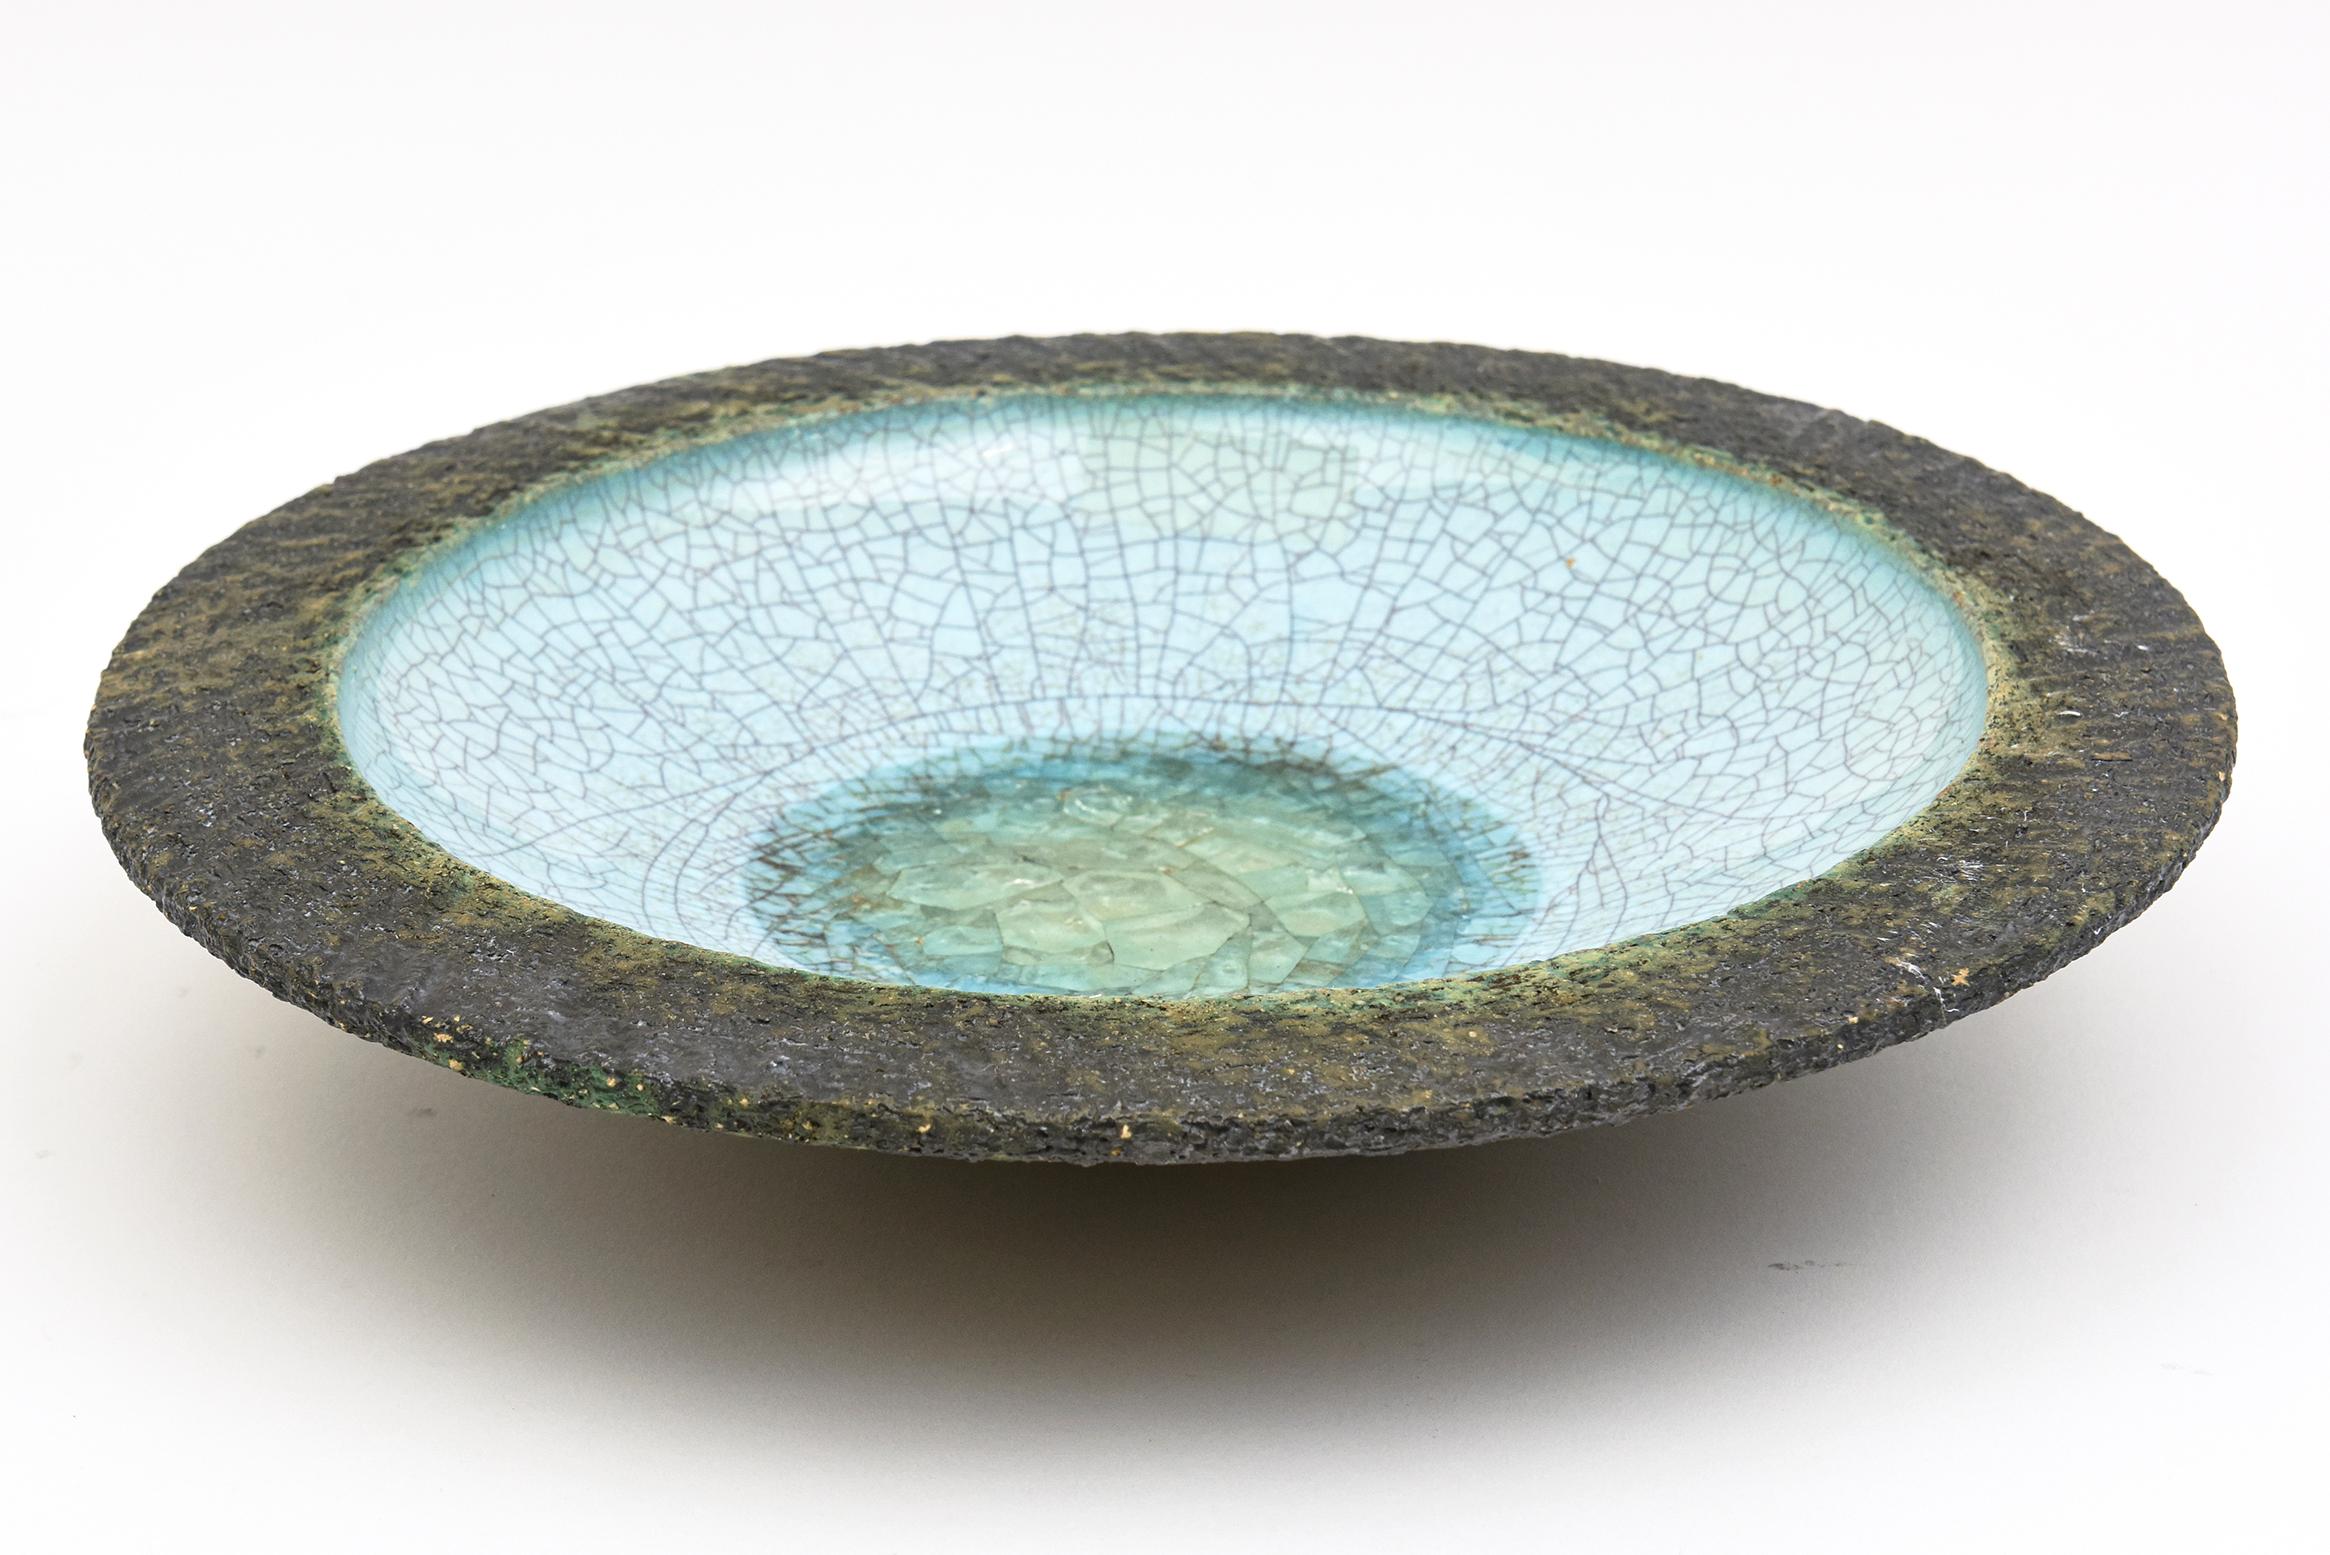 This fabulous Dutch Mid-Century Modern ceramic bowl with crackled glass fritte in the center is a very obscure and rare bowl marked Holland on the bottom. It is very much in the style of Guido Gambone meets Bitossi. The outside ceramic rim is the